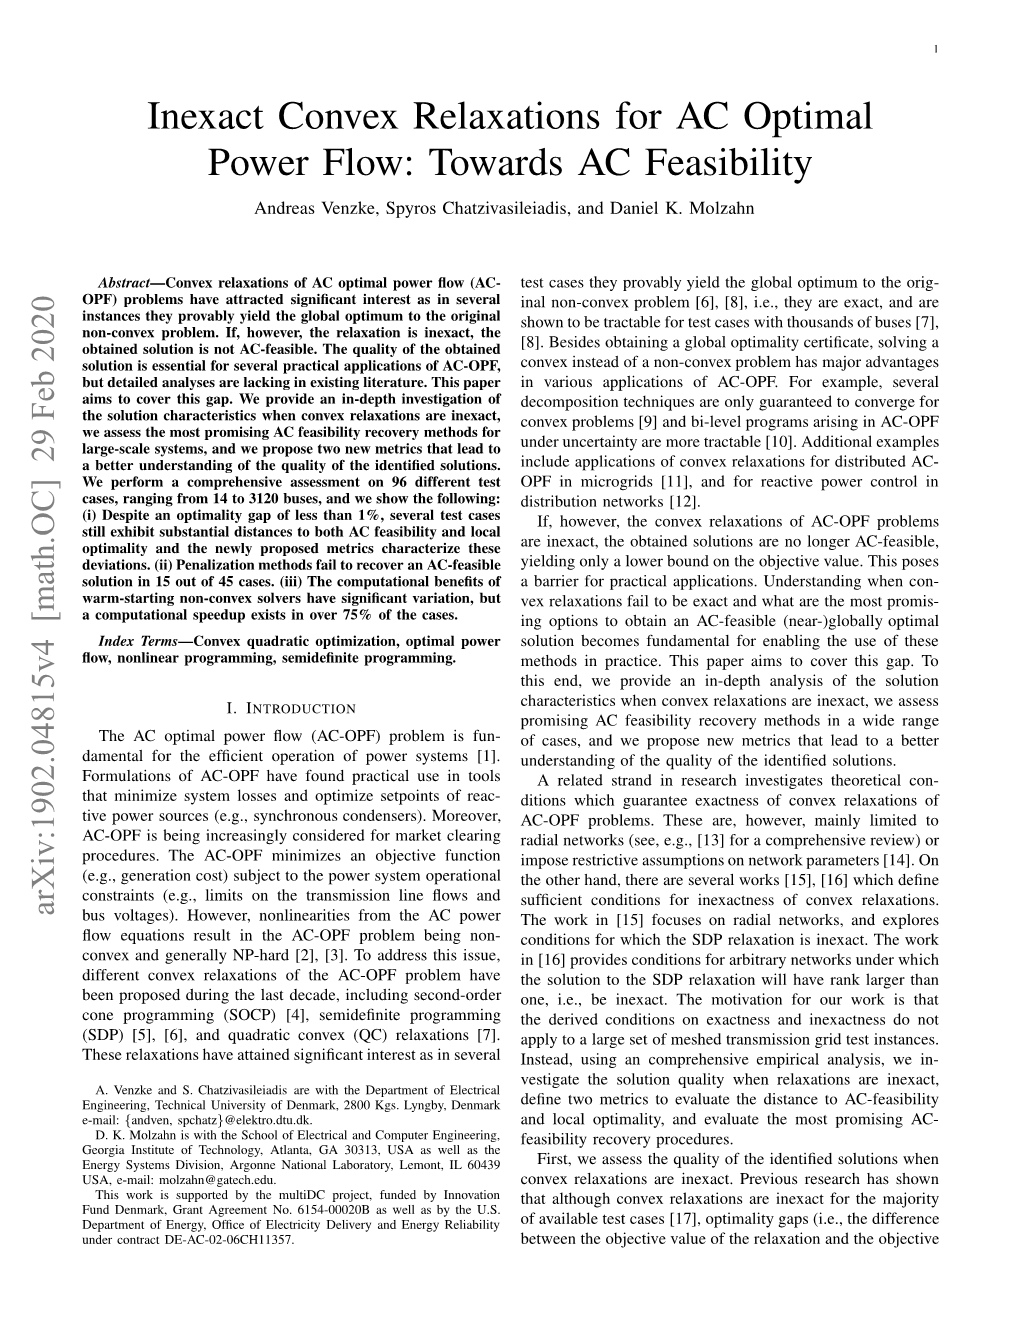 Inexact Convex Relaxations for AC Optimal Power Flow